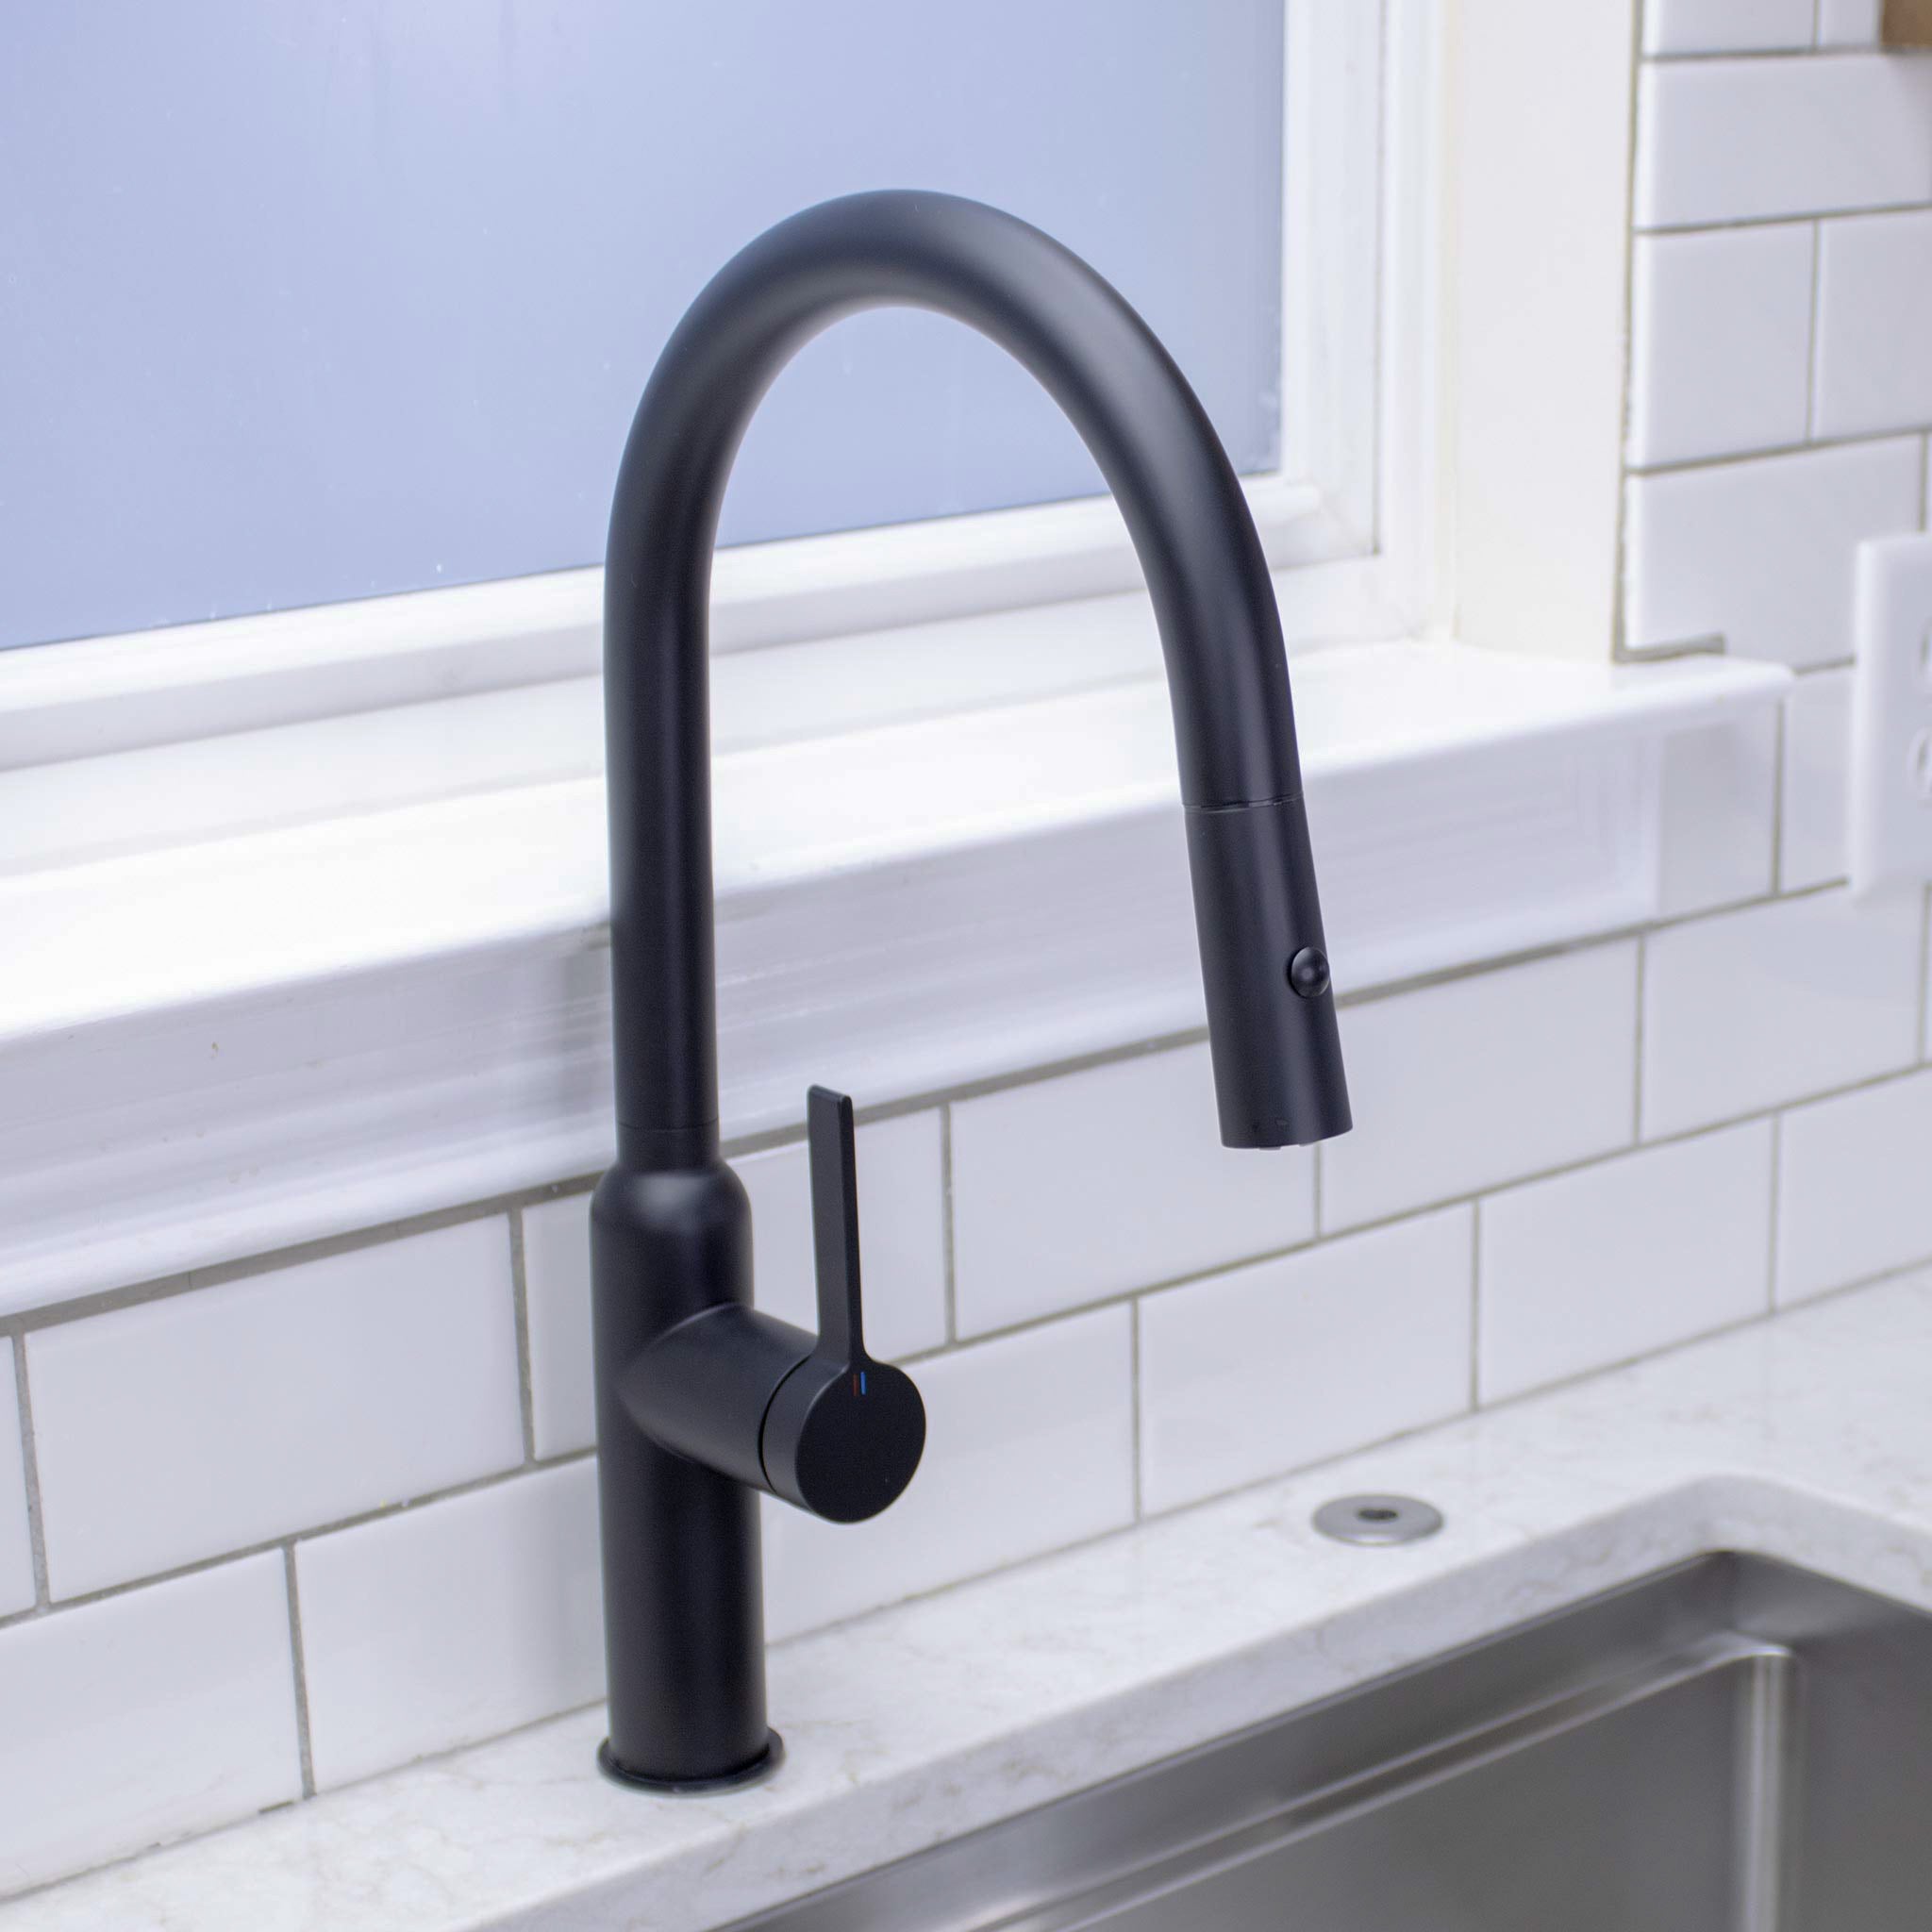 Matte black stainless steel Claudette Kitchen Faucet streaming water into Workstation Sink